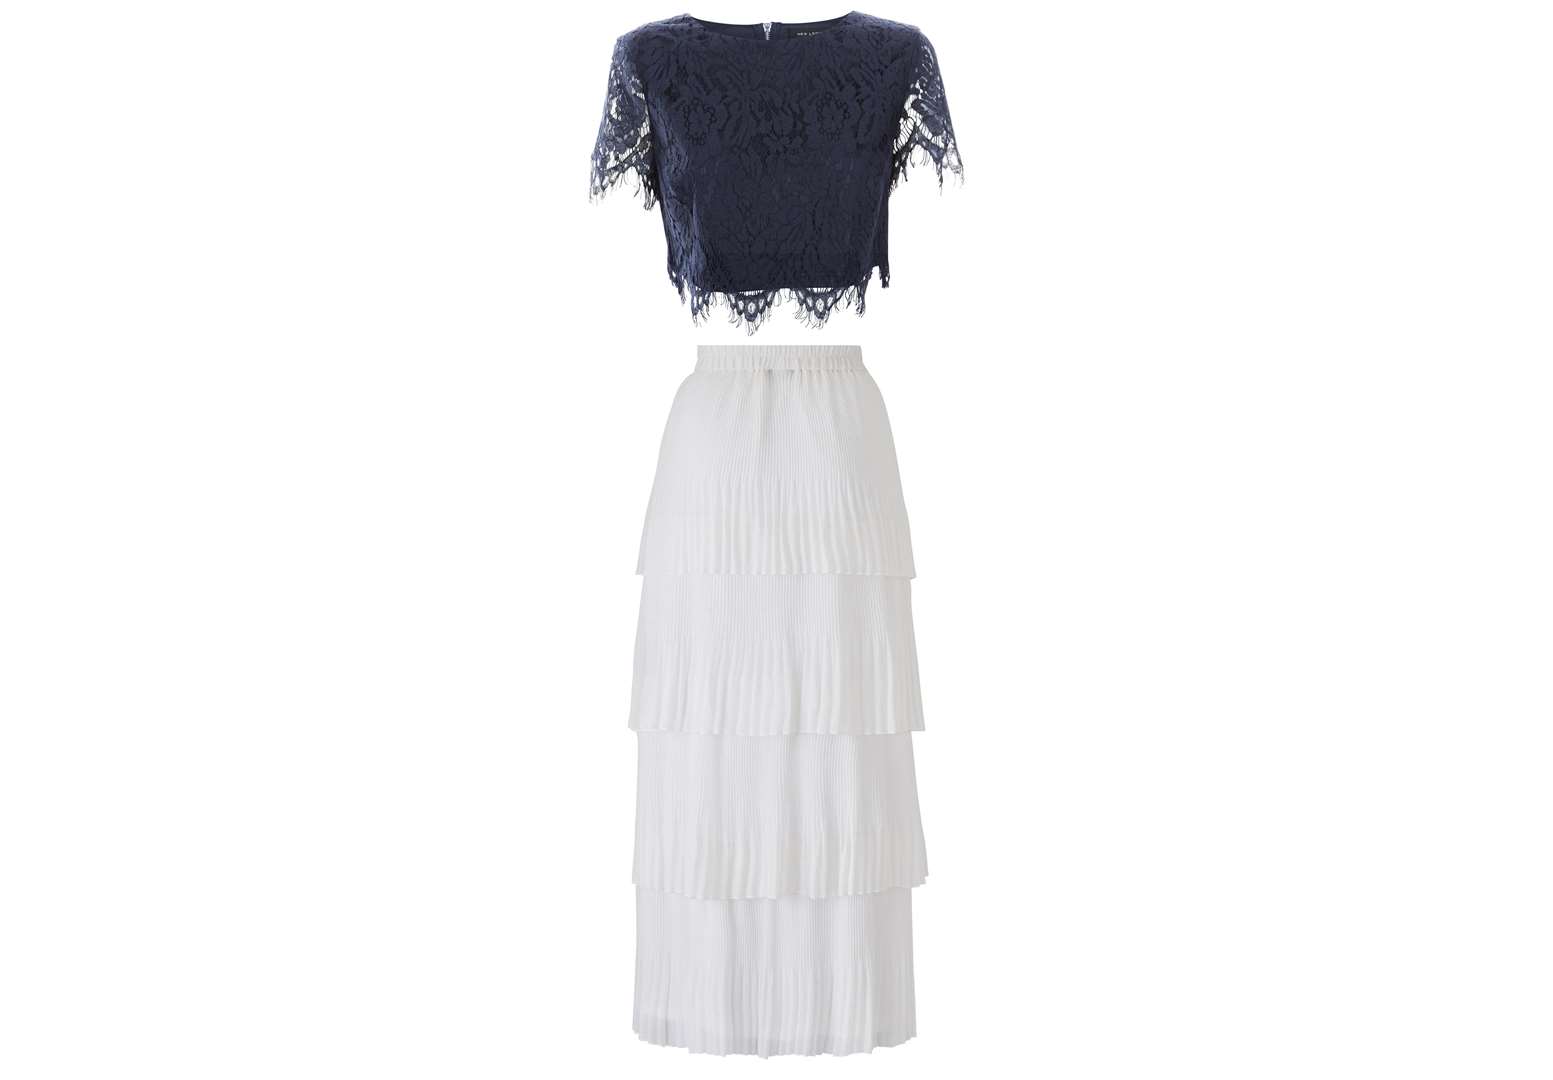 2. A MAXI SKIRT New Look Navy Lace Crop Top, £19.99; JD Williams Tiered Pleated Maxi Skirt, £45